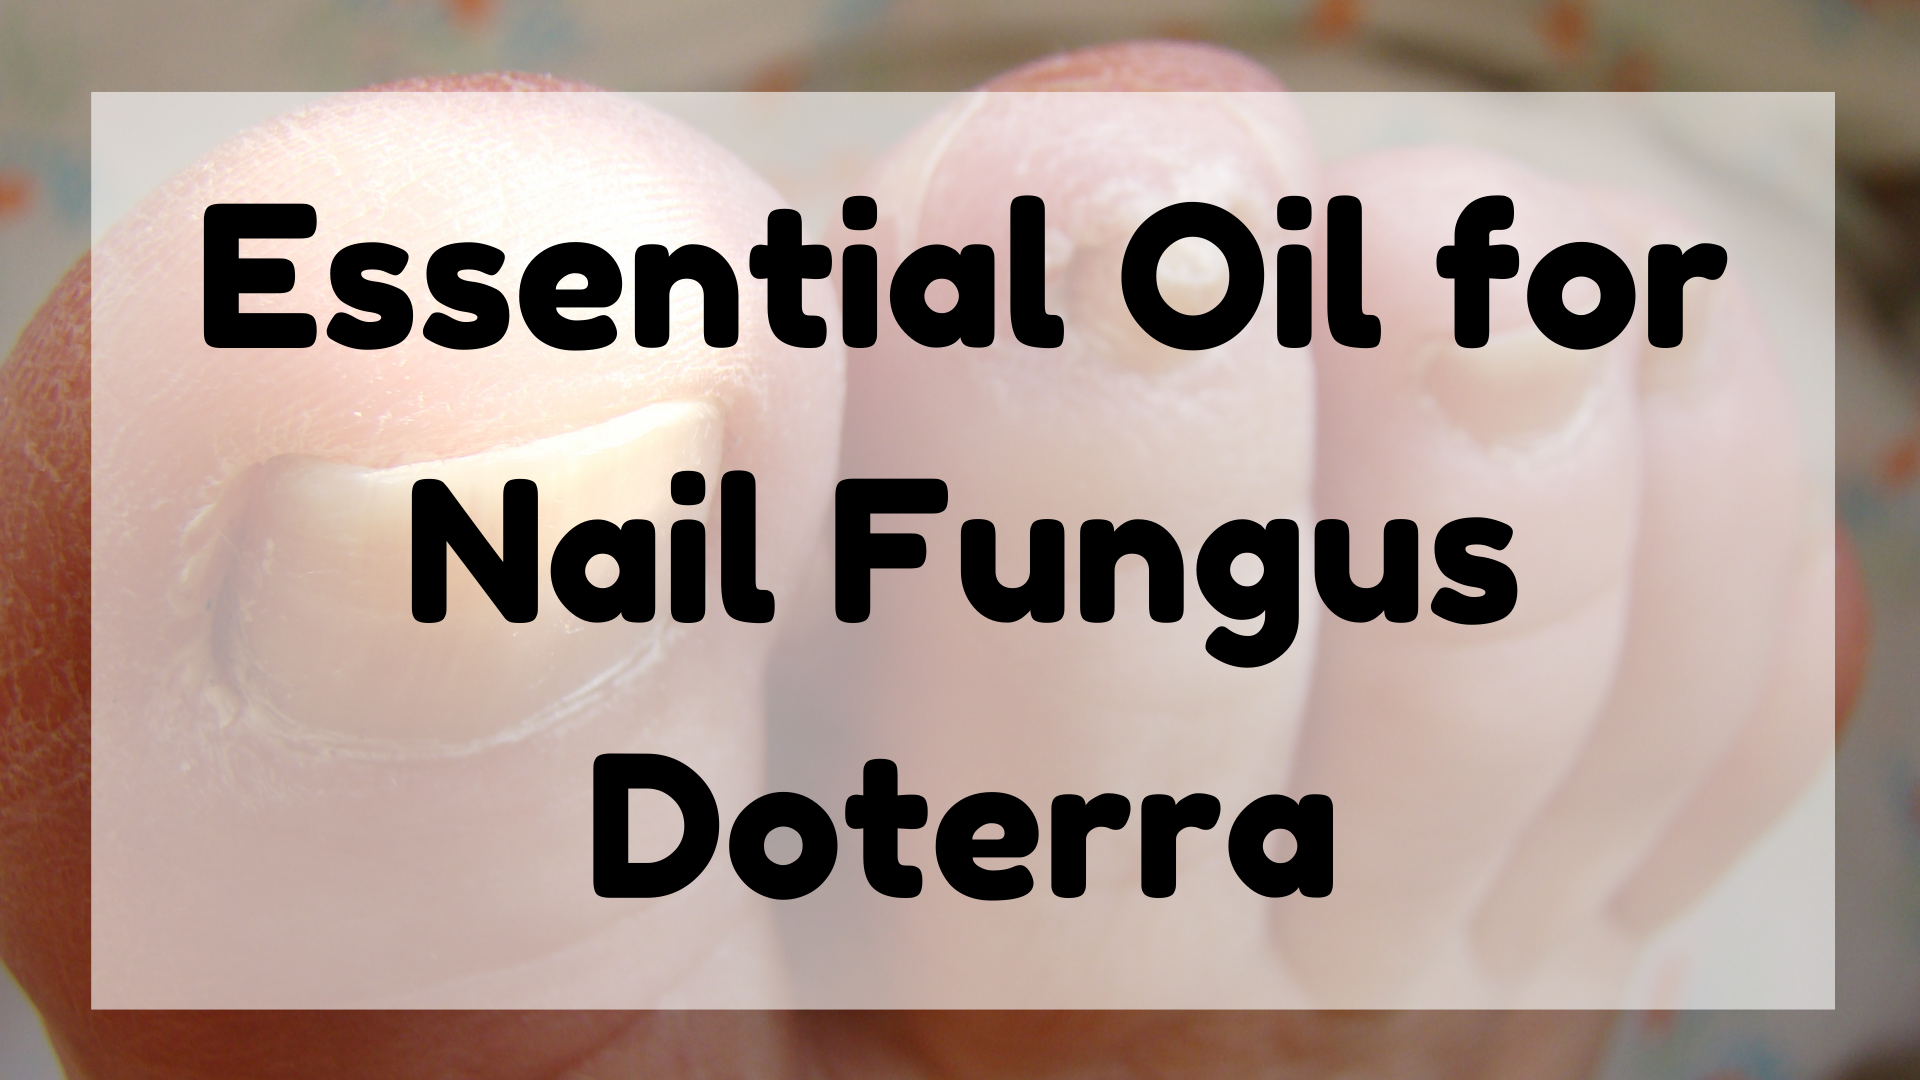 Essential Oil for Nail Fungus Doterra featured image